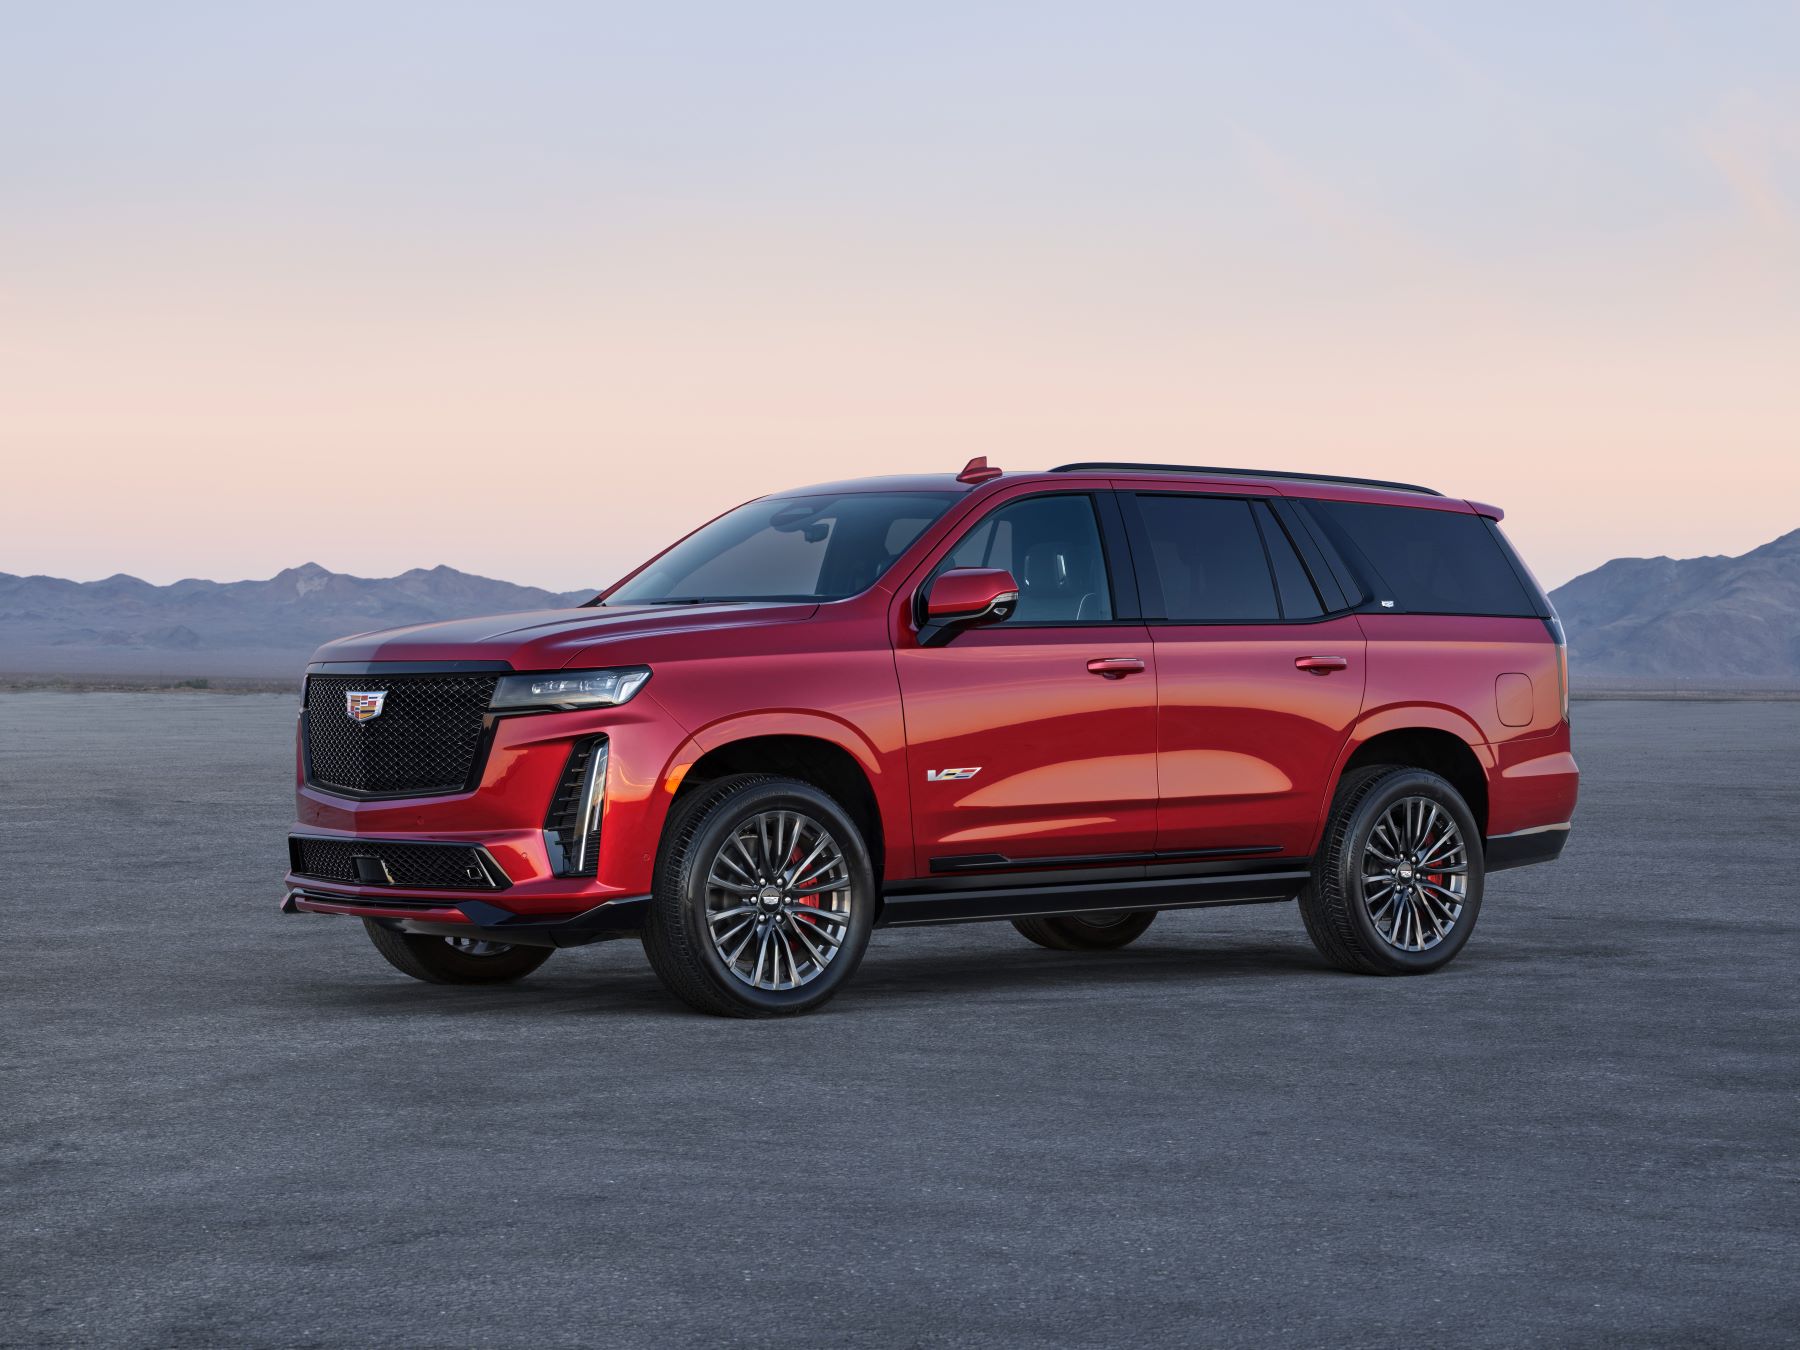 2023 Cadillac Escalade V-Series full-size luxury SUV in red